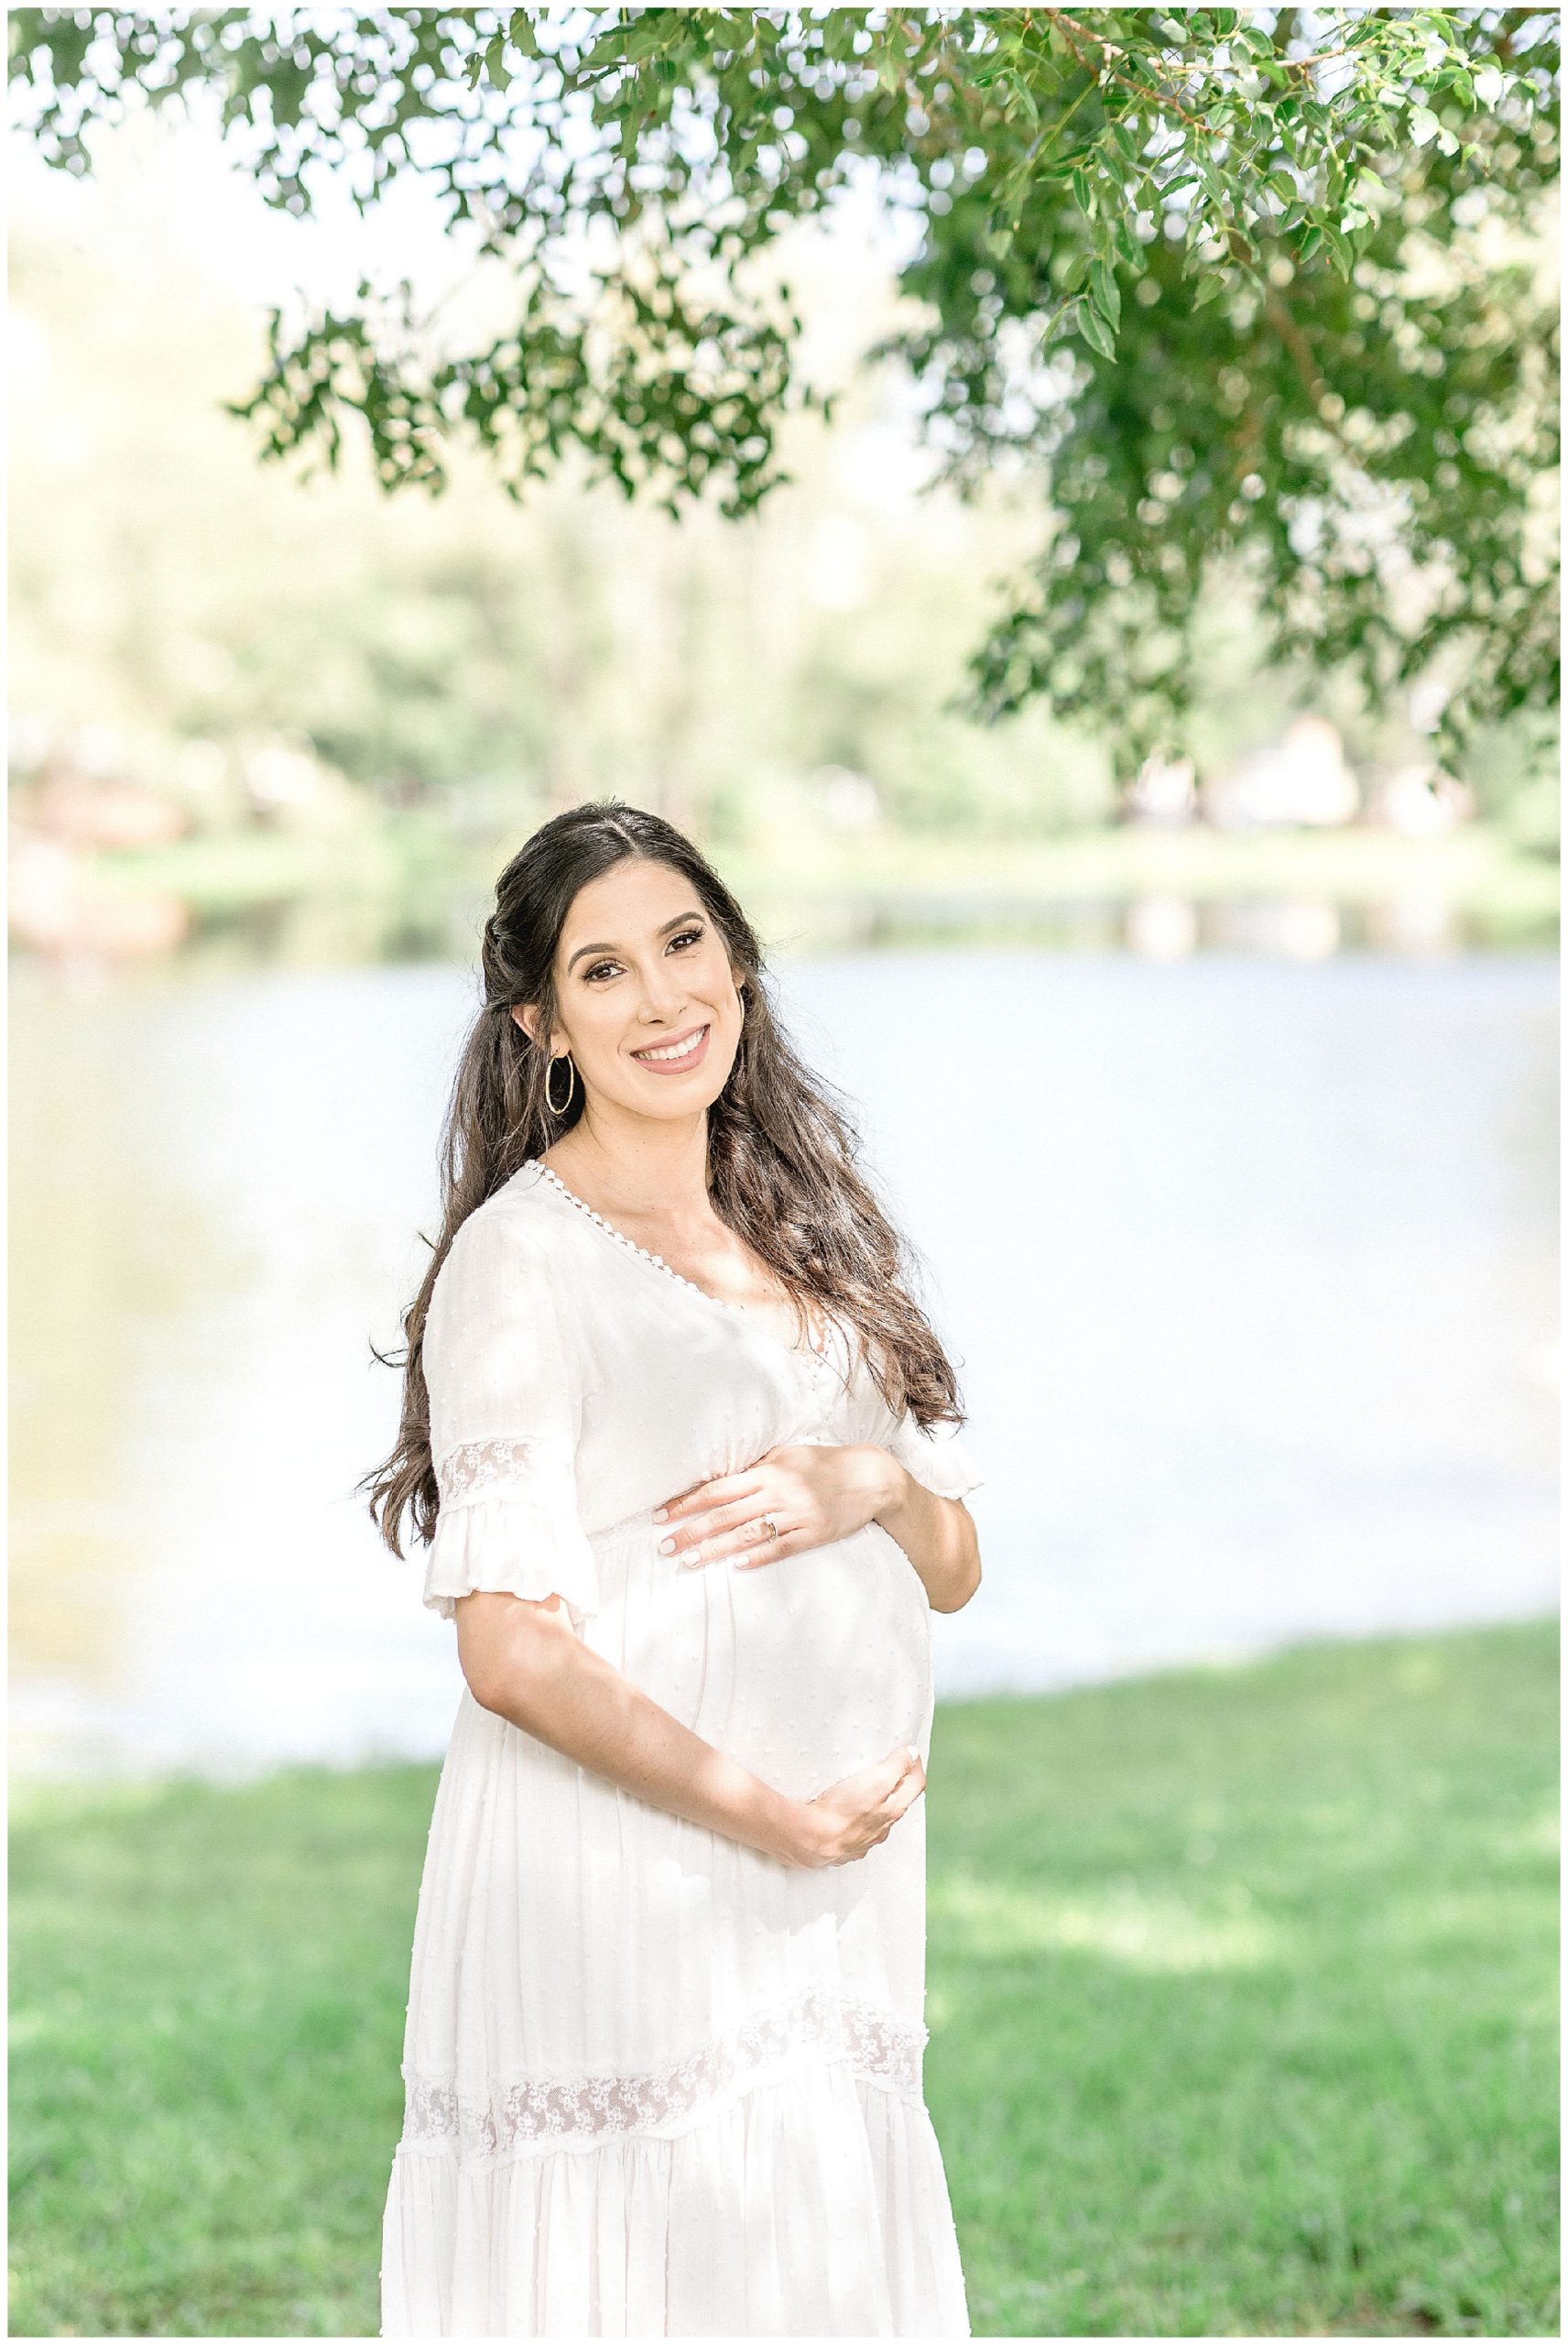 Mom smiles while holding pregnant stomach. Photos by Ivanna Vidal Photography.